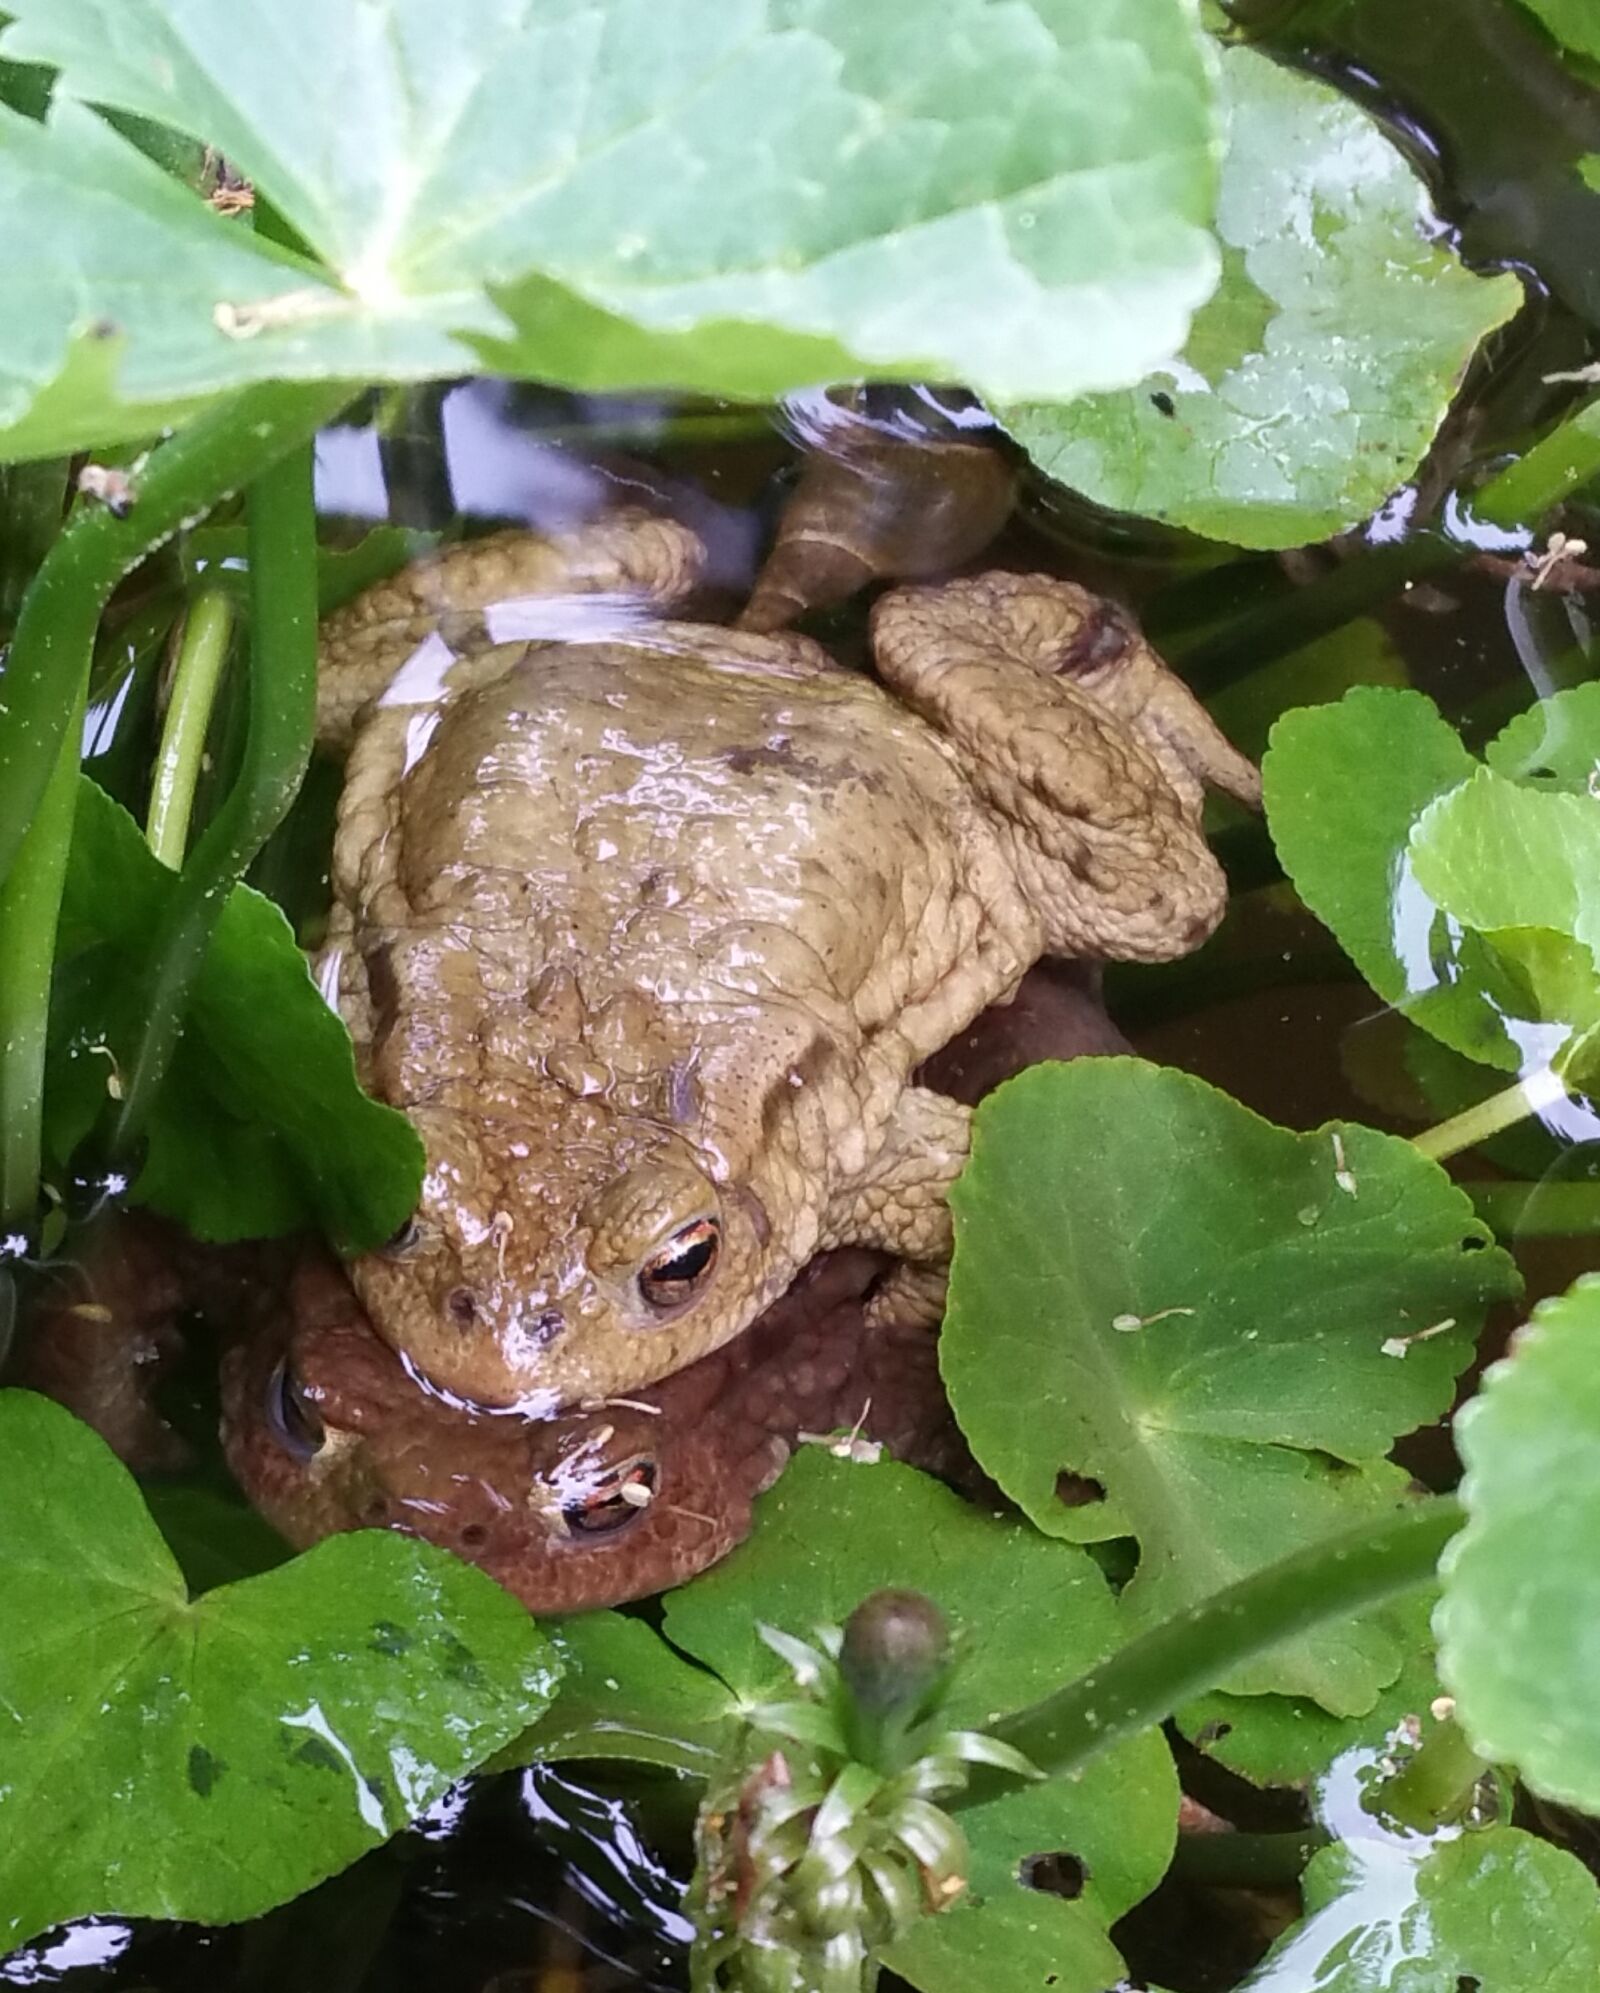 Samsung Galaxy S5 LTE-A sample photo. Toads, unken, spawn photography